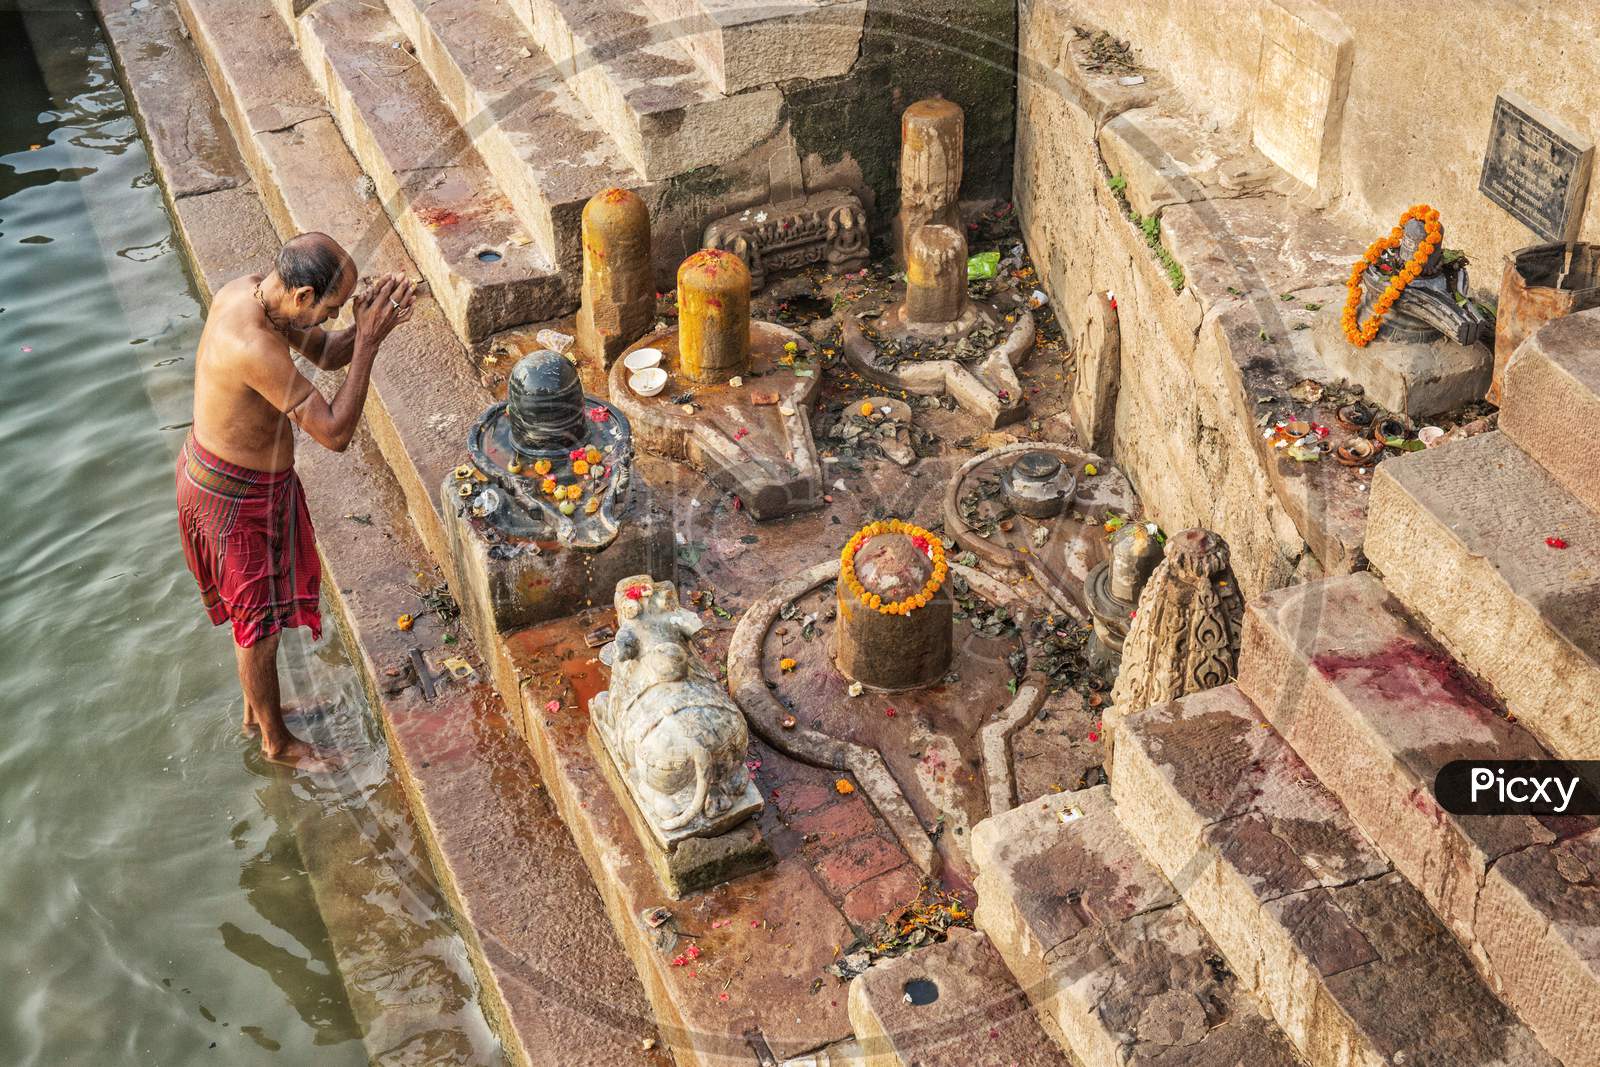 Man Offers Water To The Ganges As Part Of A Morning Prayer Ritual At The Ganges River Ghat At Varanasi, India